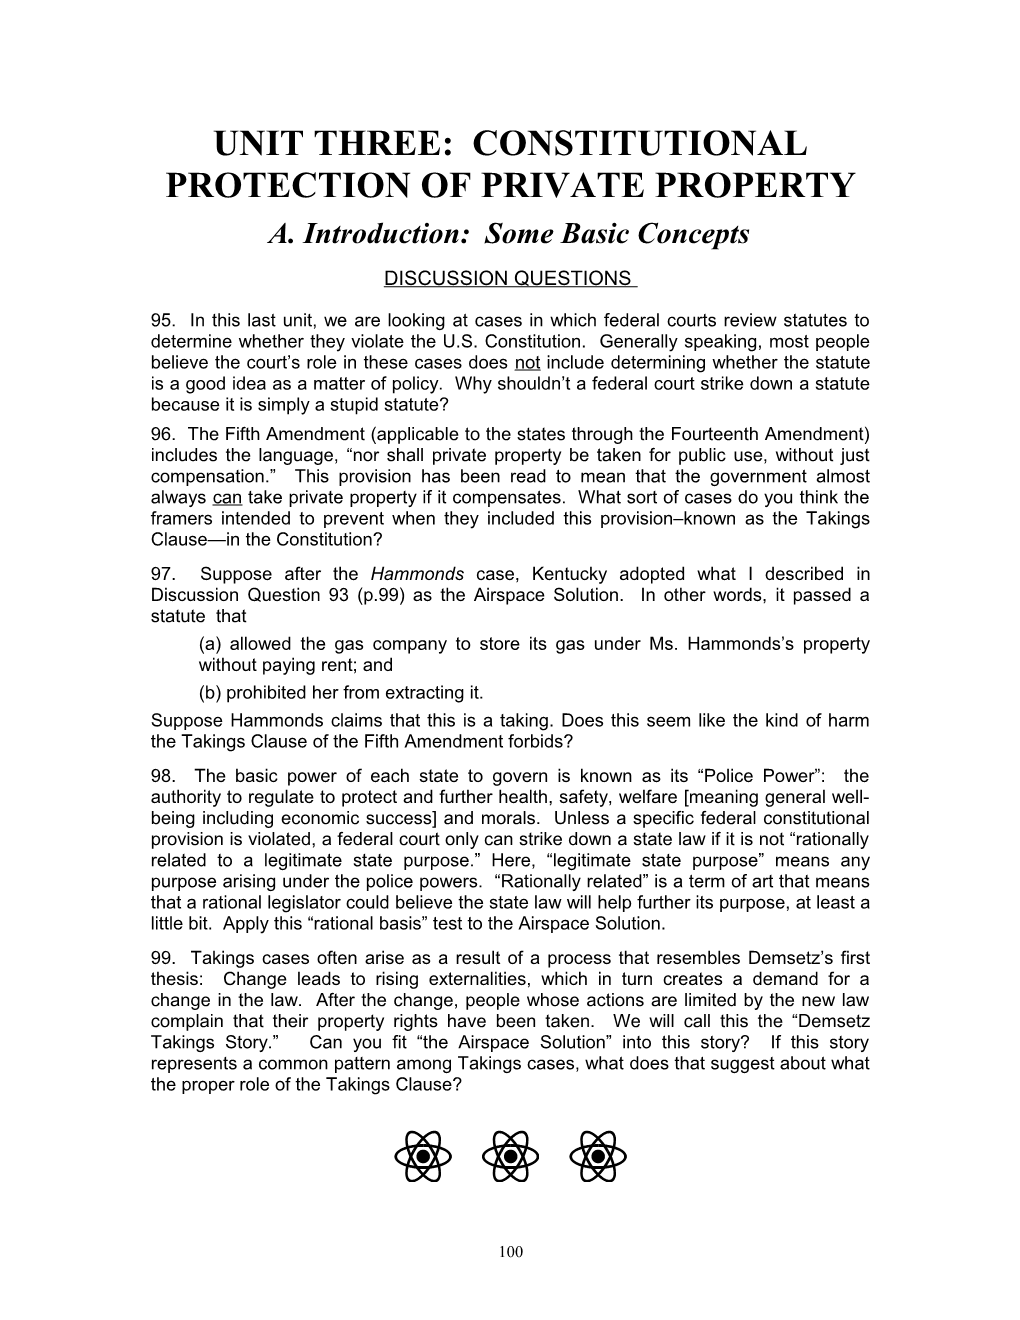 Unit Three: Constitutional Protection of Property